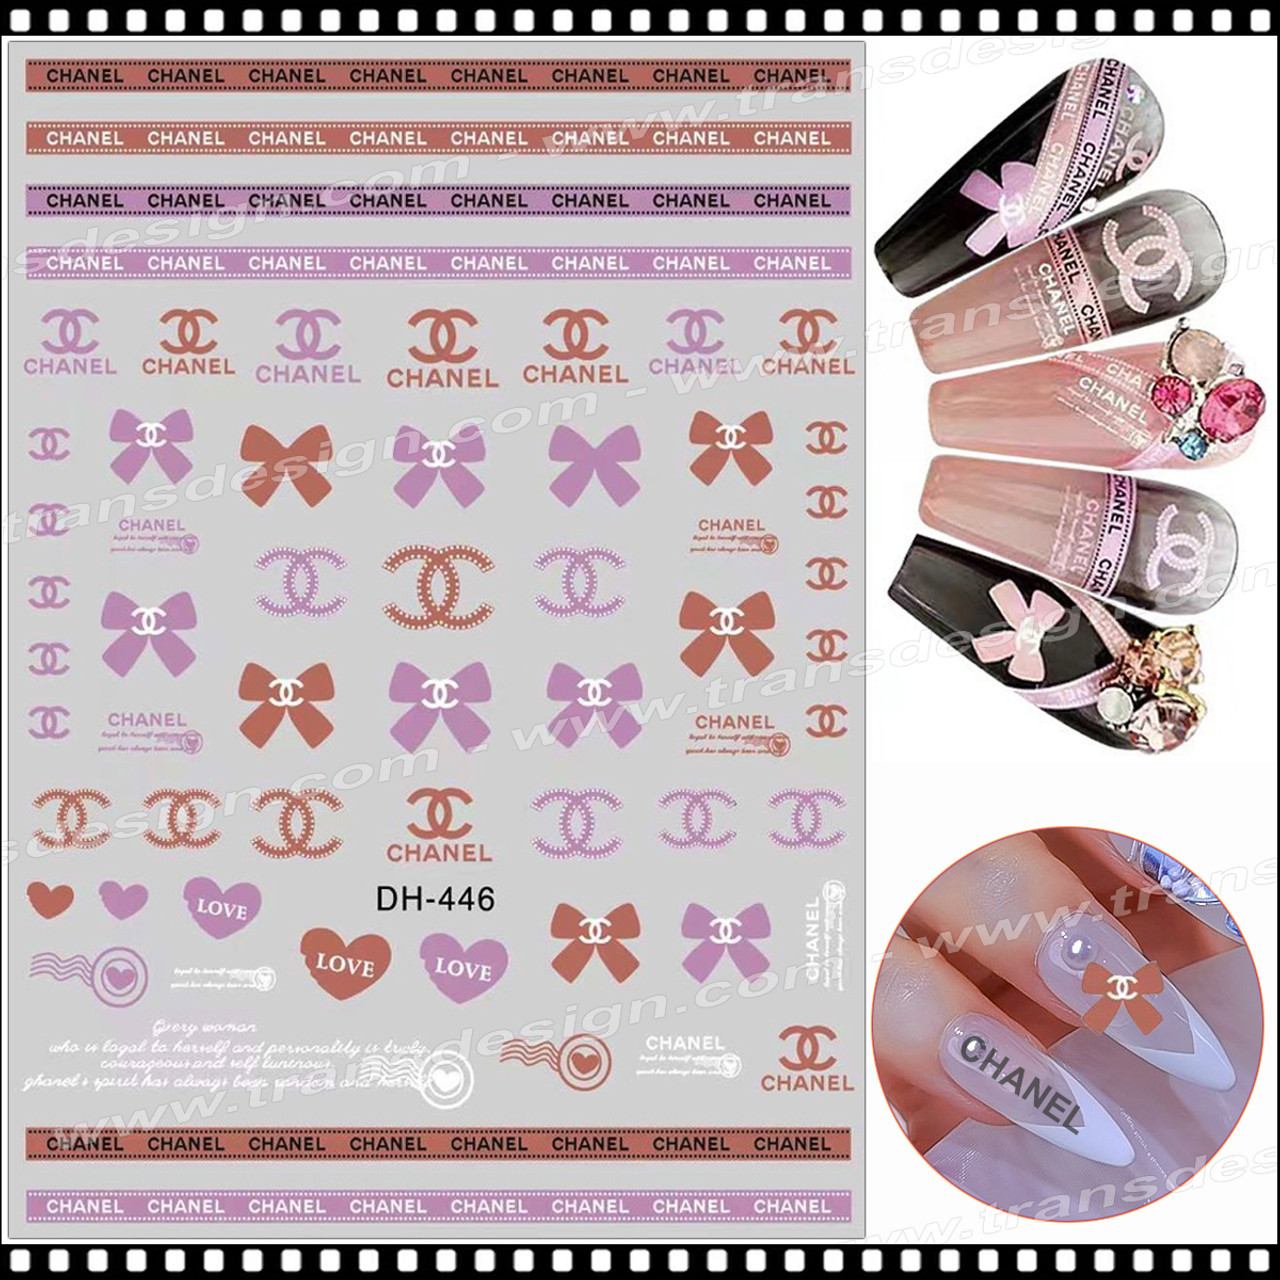 Sticker Nail Art - Brand Name, Breast Cancer, Money - Page 1 - TDI, Inc